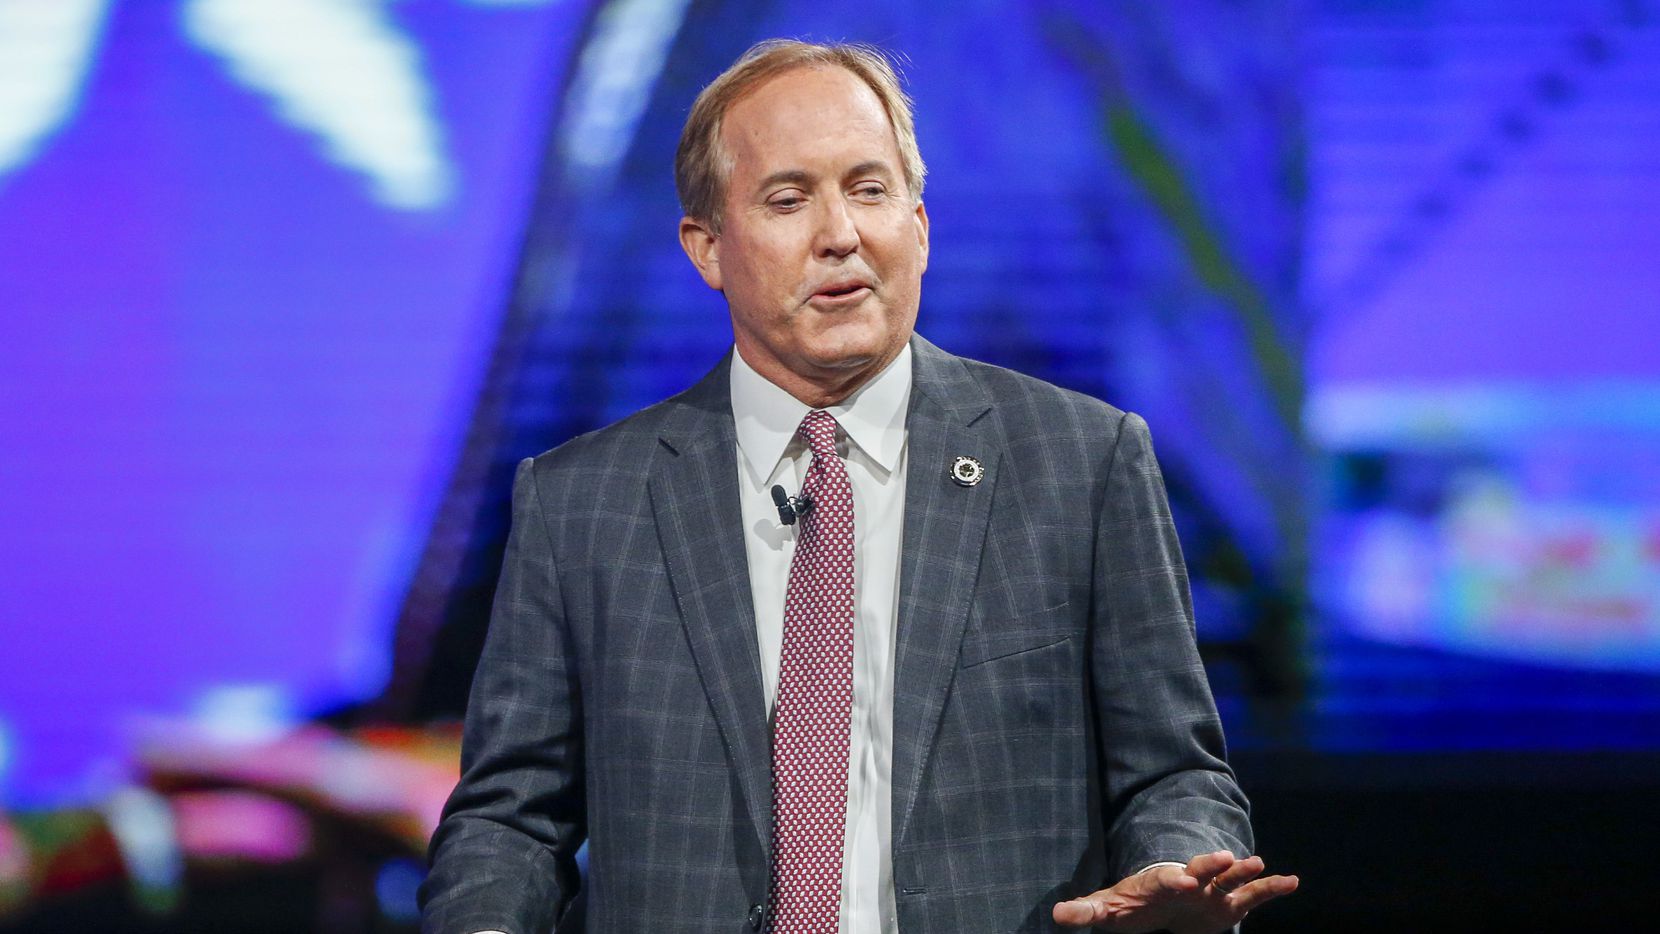 Texas Attorney General Ken Paxton released a report in August 2021 that clears him of...